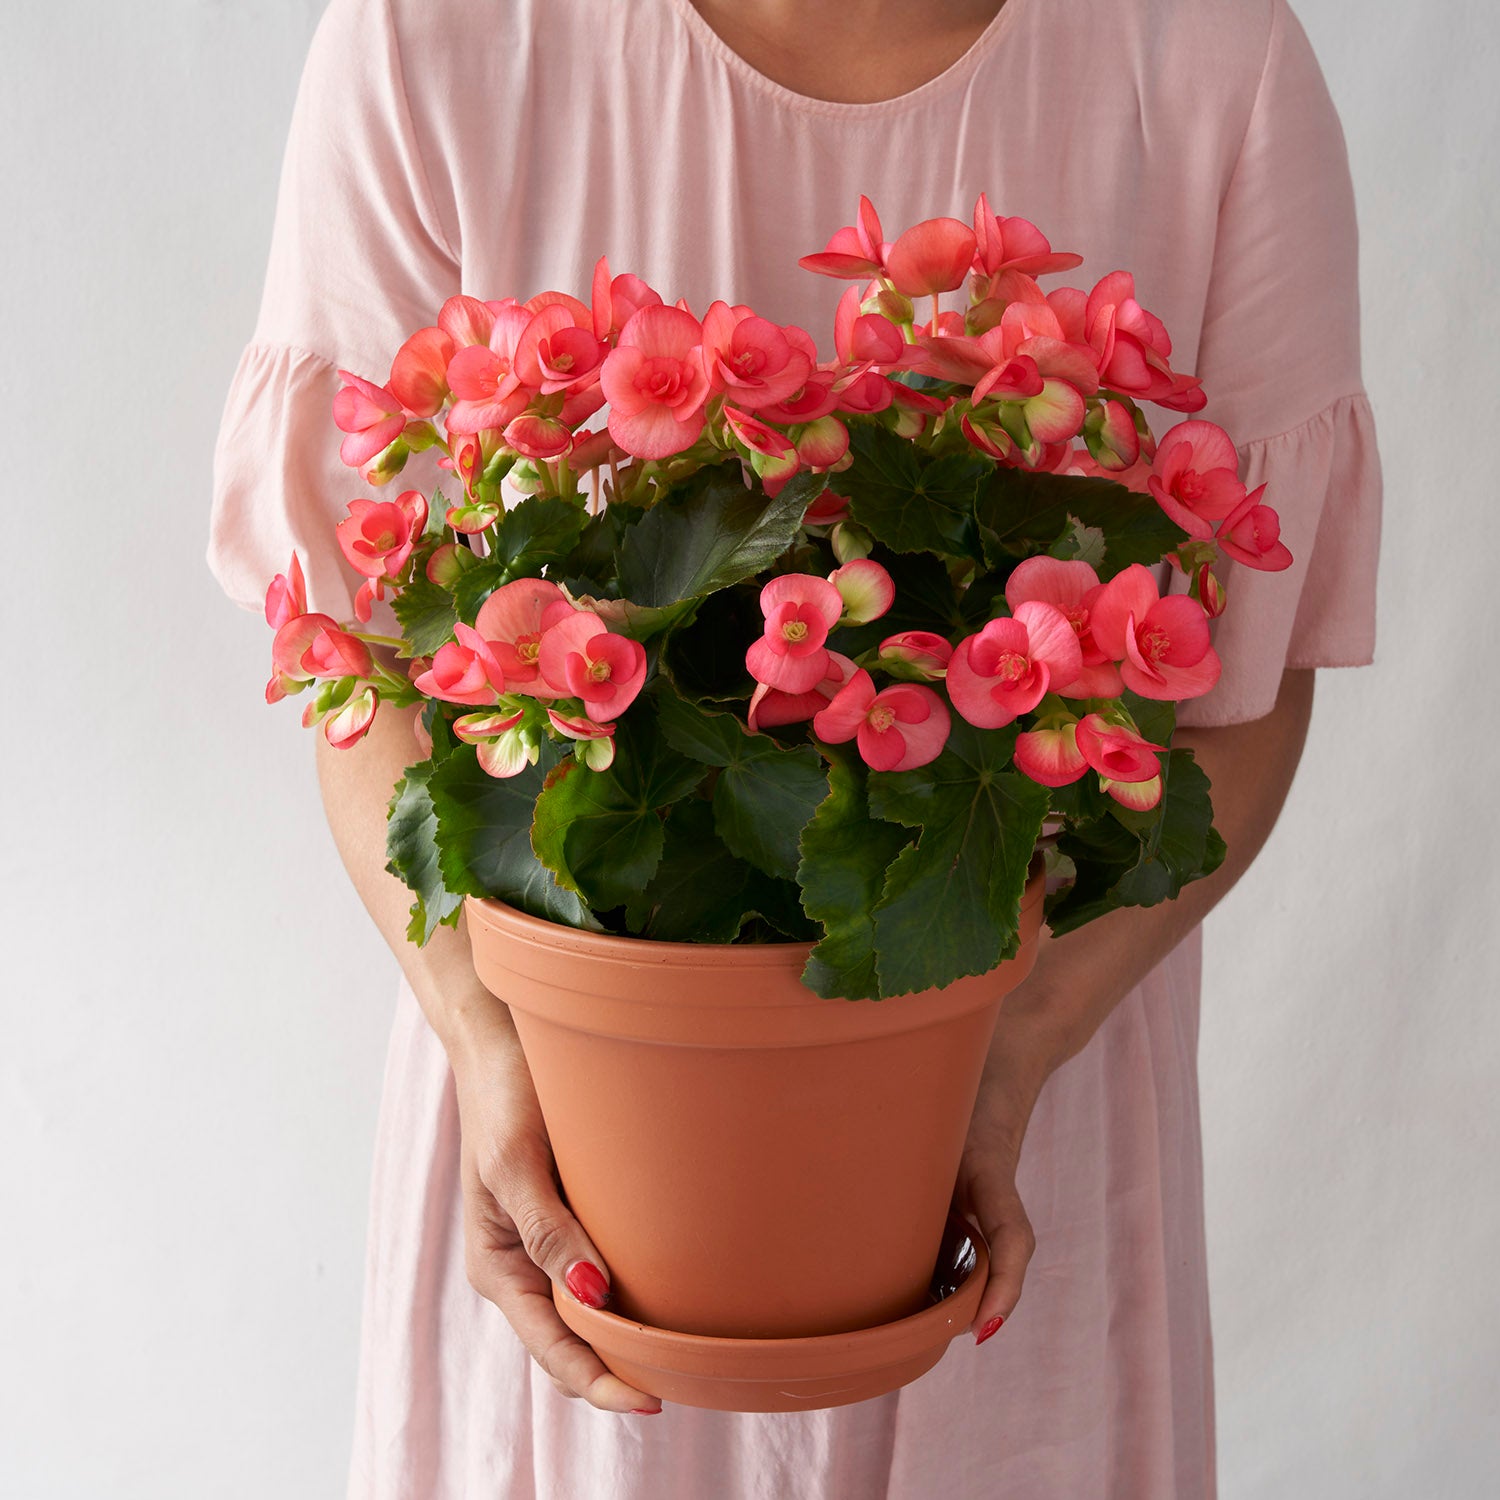 Woman in pink dress holdin coral pink begonia in clay pot.